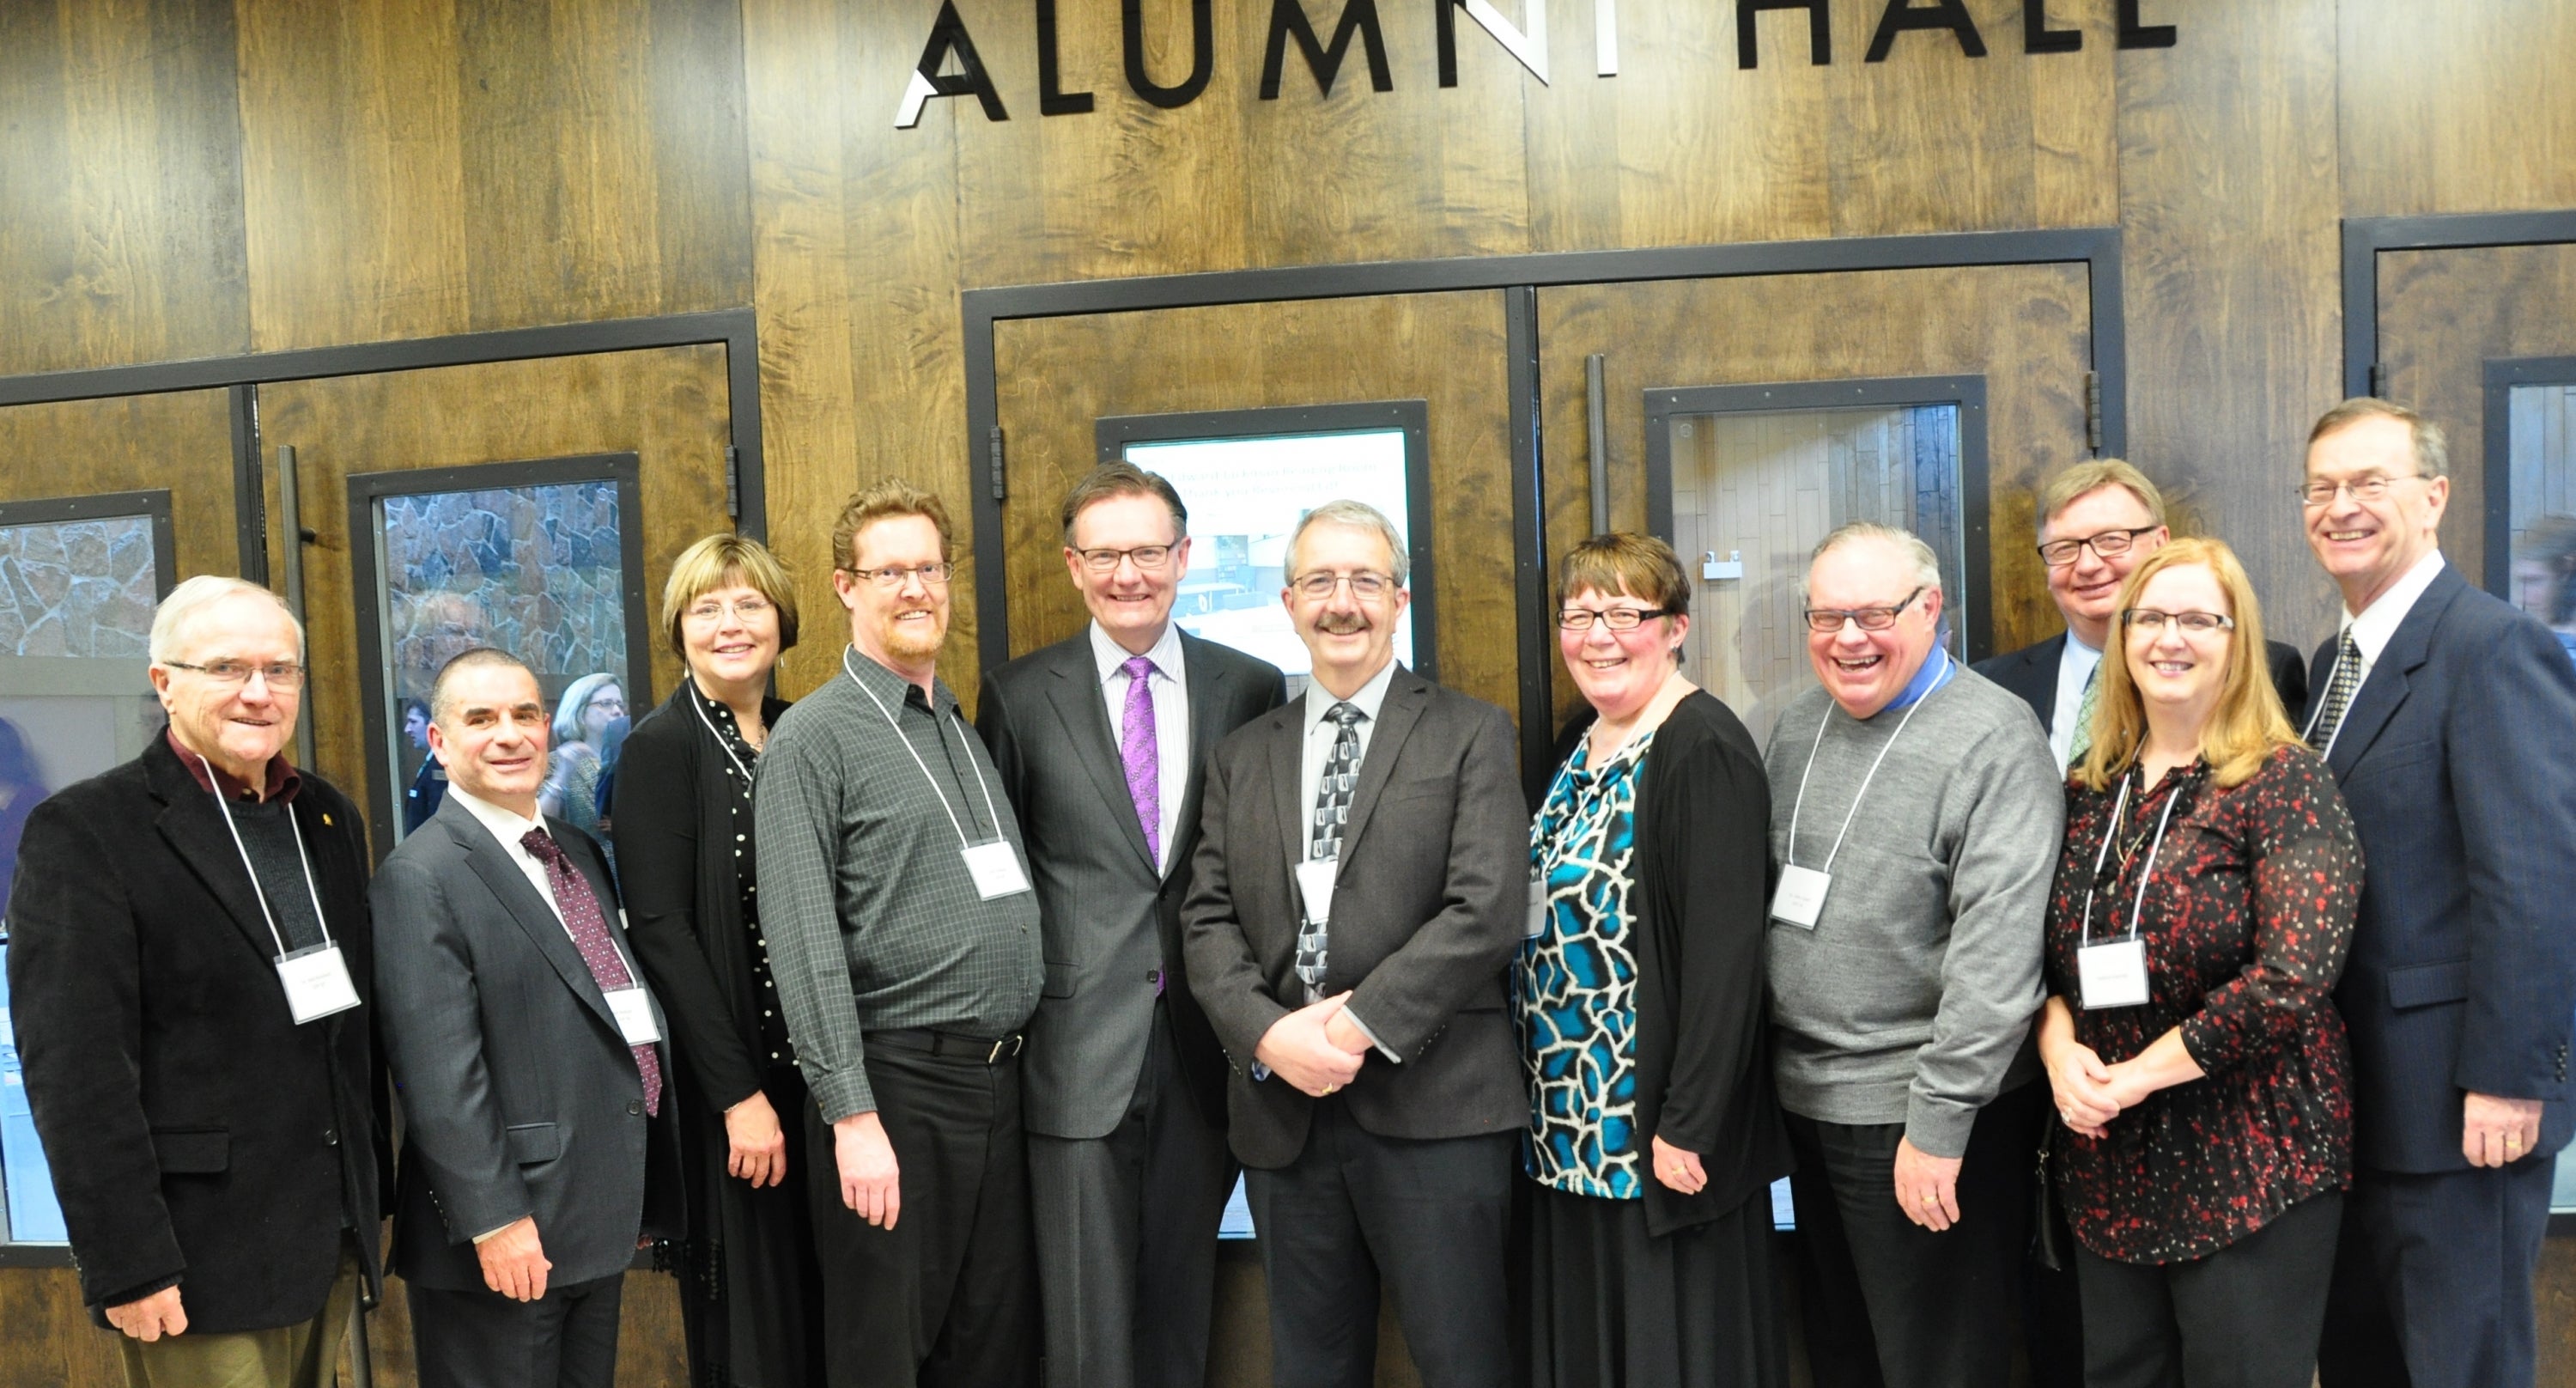 A group of alumni stand in front of the entrance to Alumni Hall